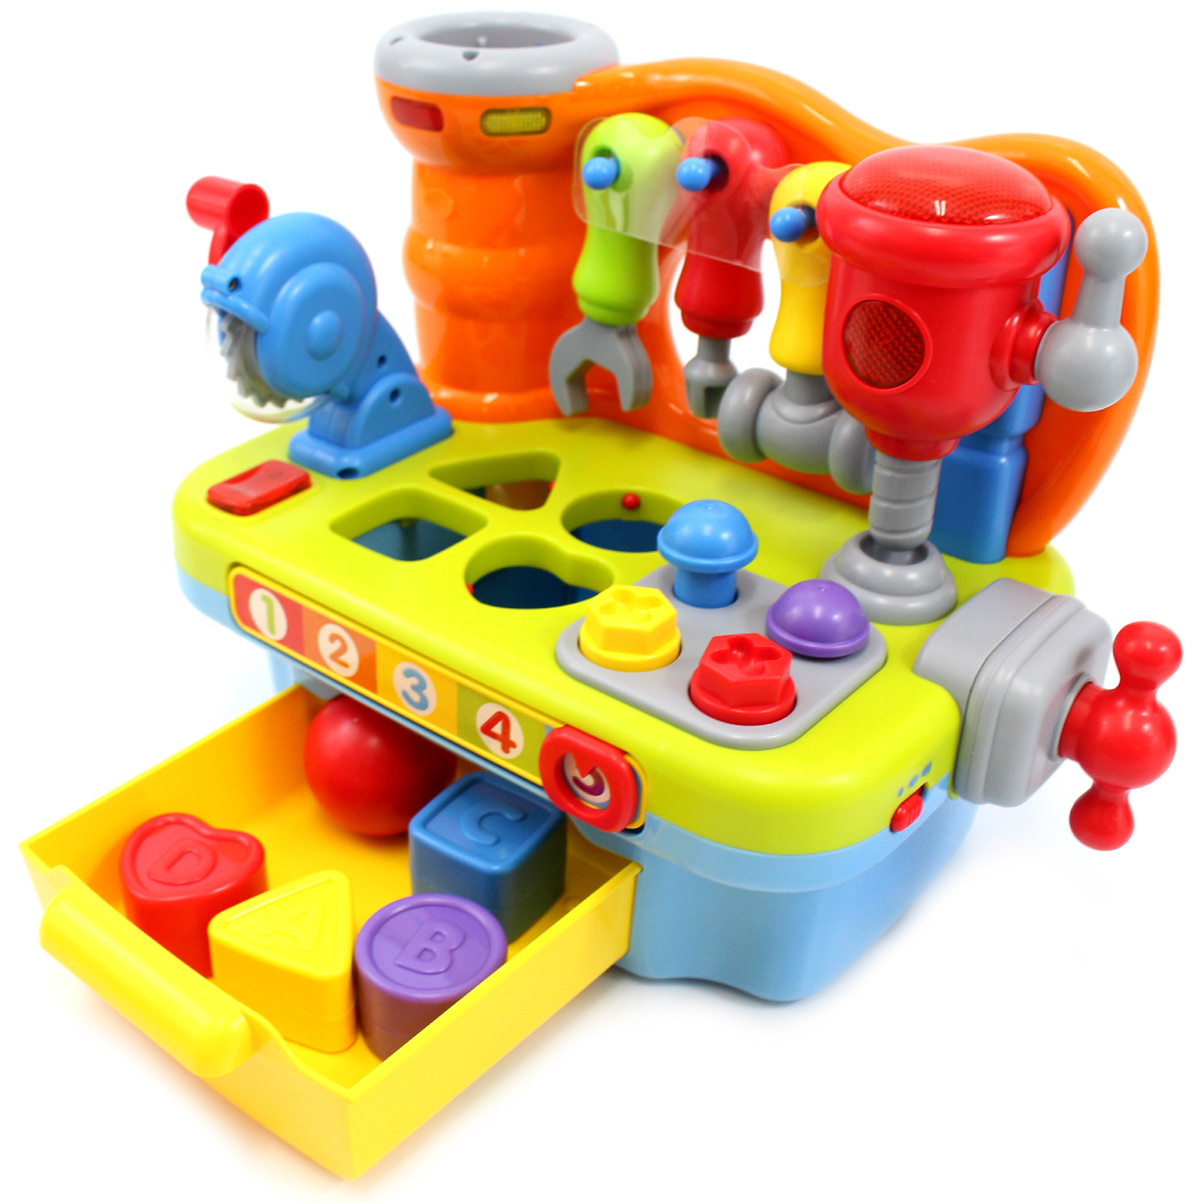 AZ Trading and Import Little Engineer Multifunctional Musical Learning Tool Workbench For Kids